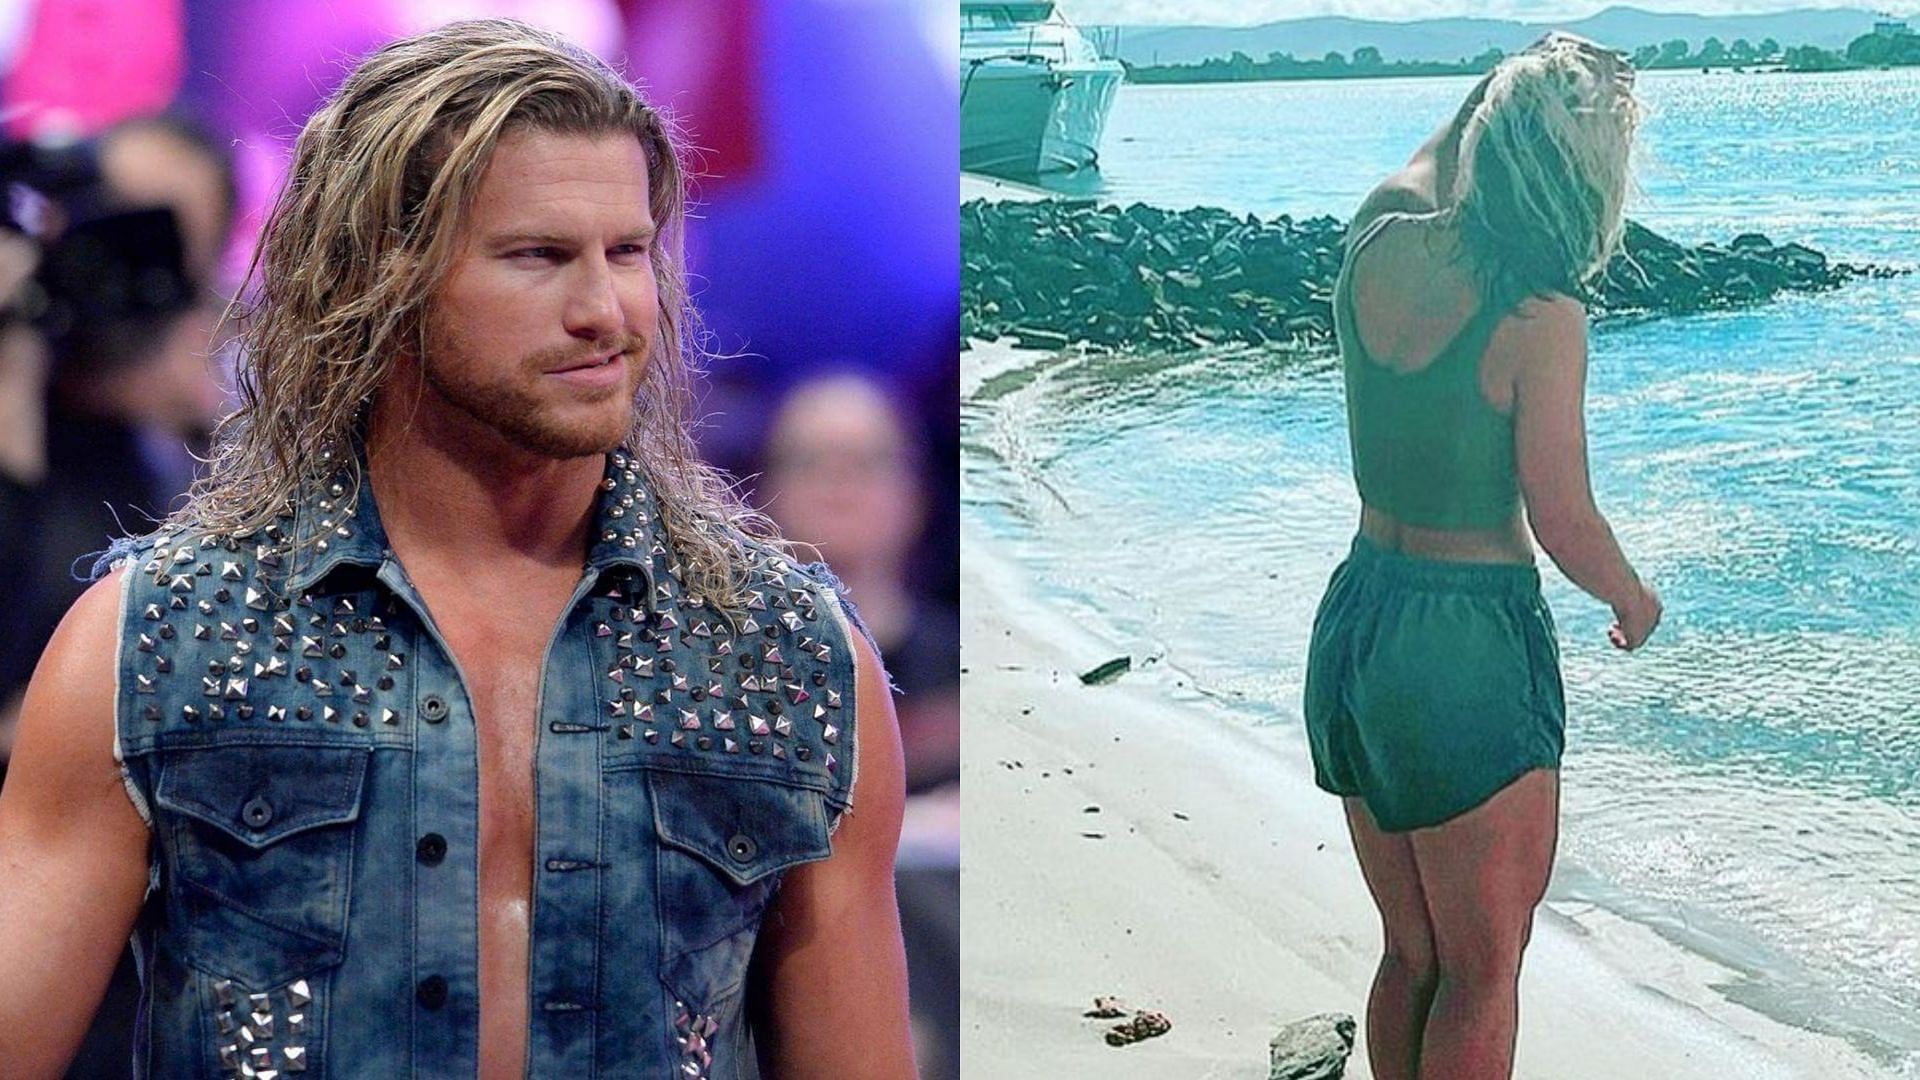 WWE Superstar Dolph Ziggler (left) and AEW star Toni Storm (right)